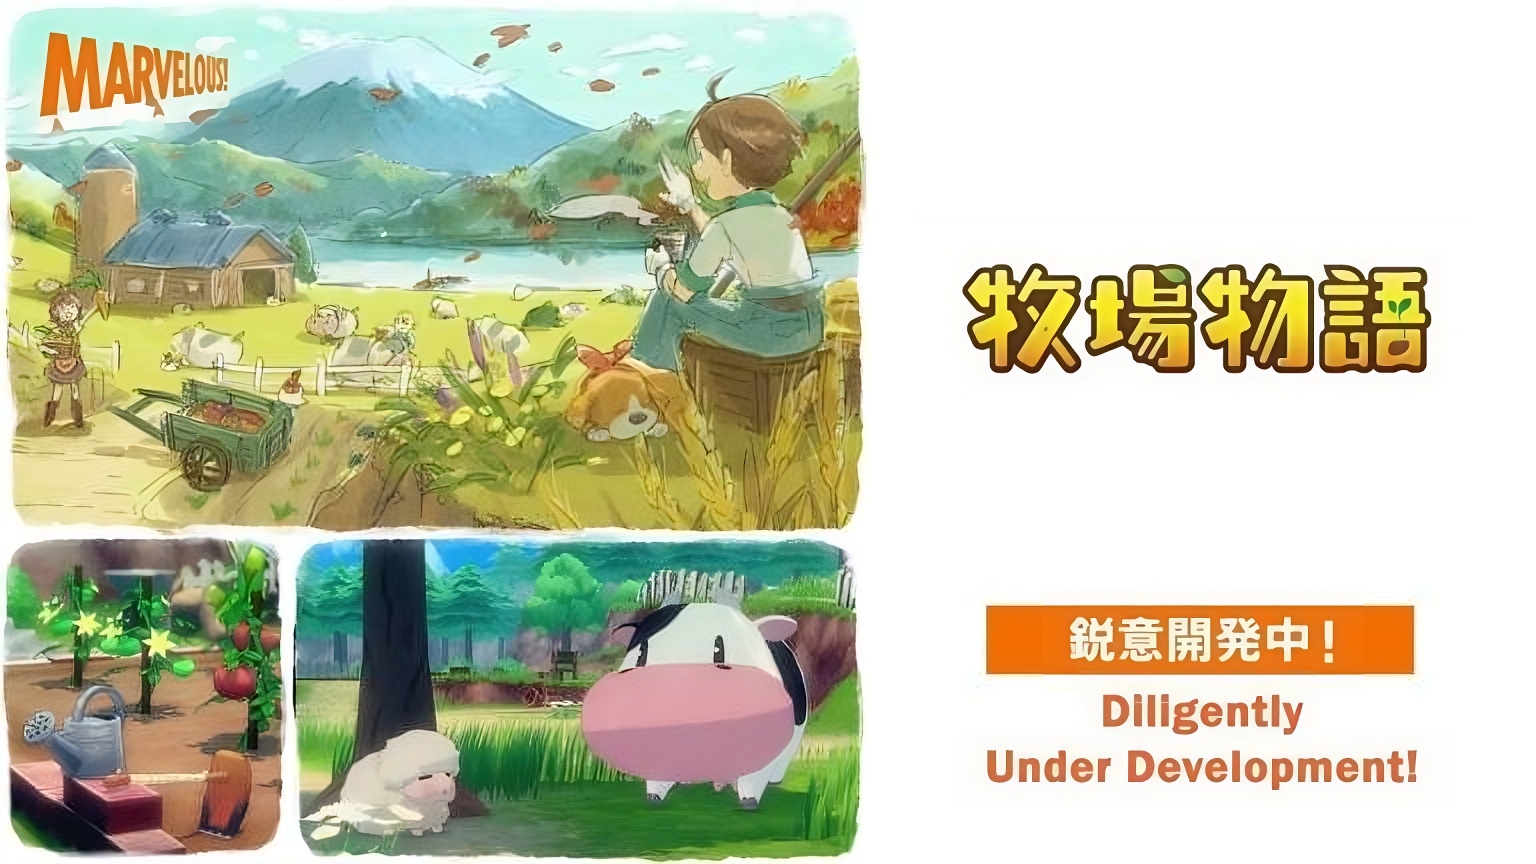 Marvelous have also announced two new entries for Story of Seasons, the long-running farm-simulation RPG series.